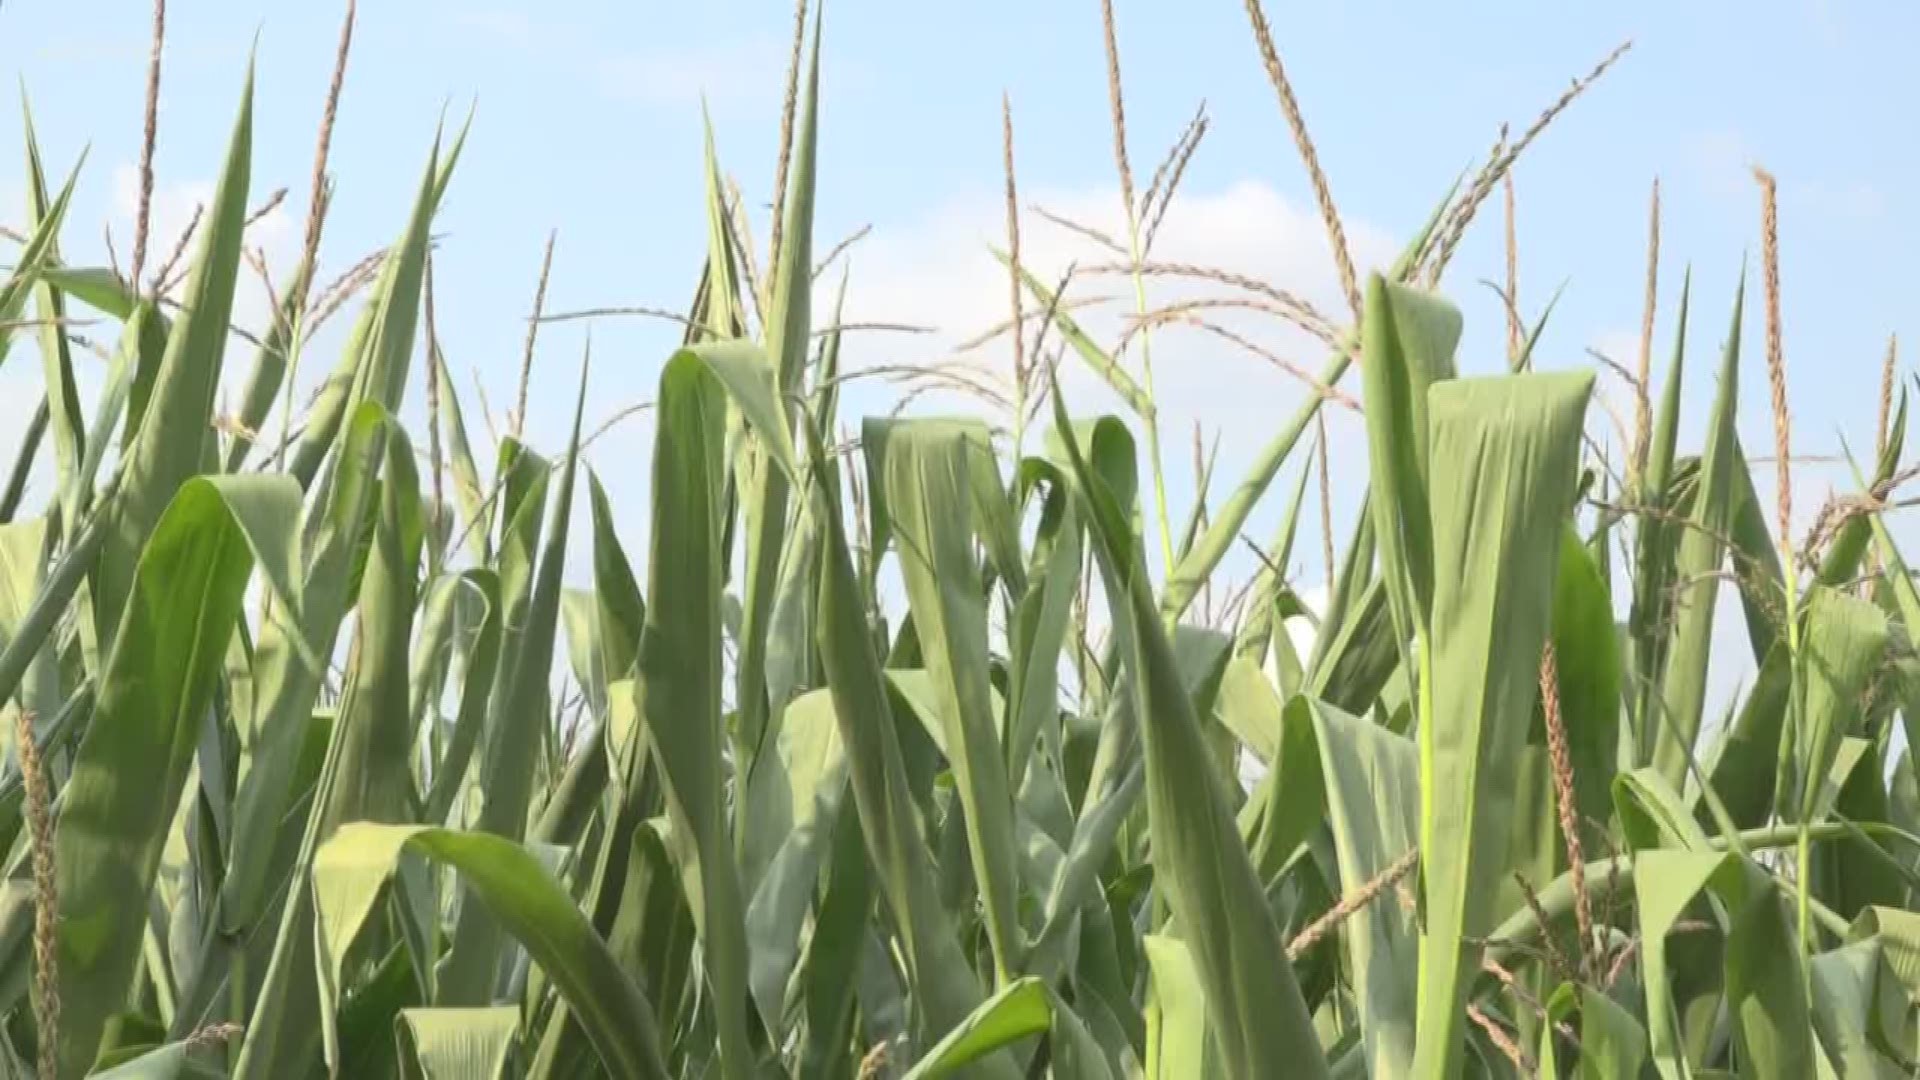 Hot, dry weather taking a toll on crops